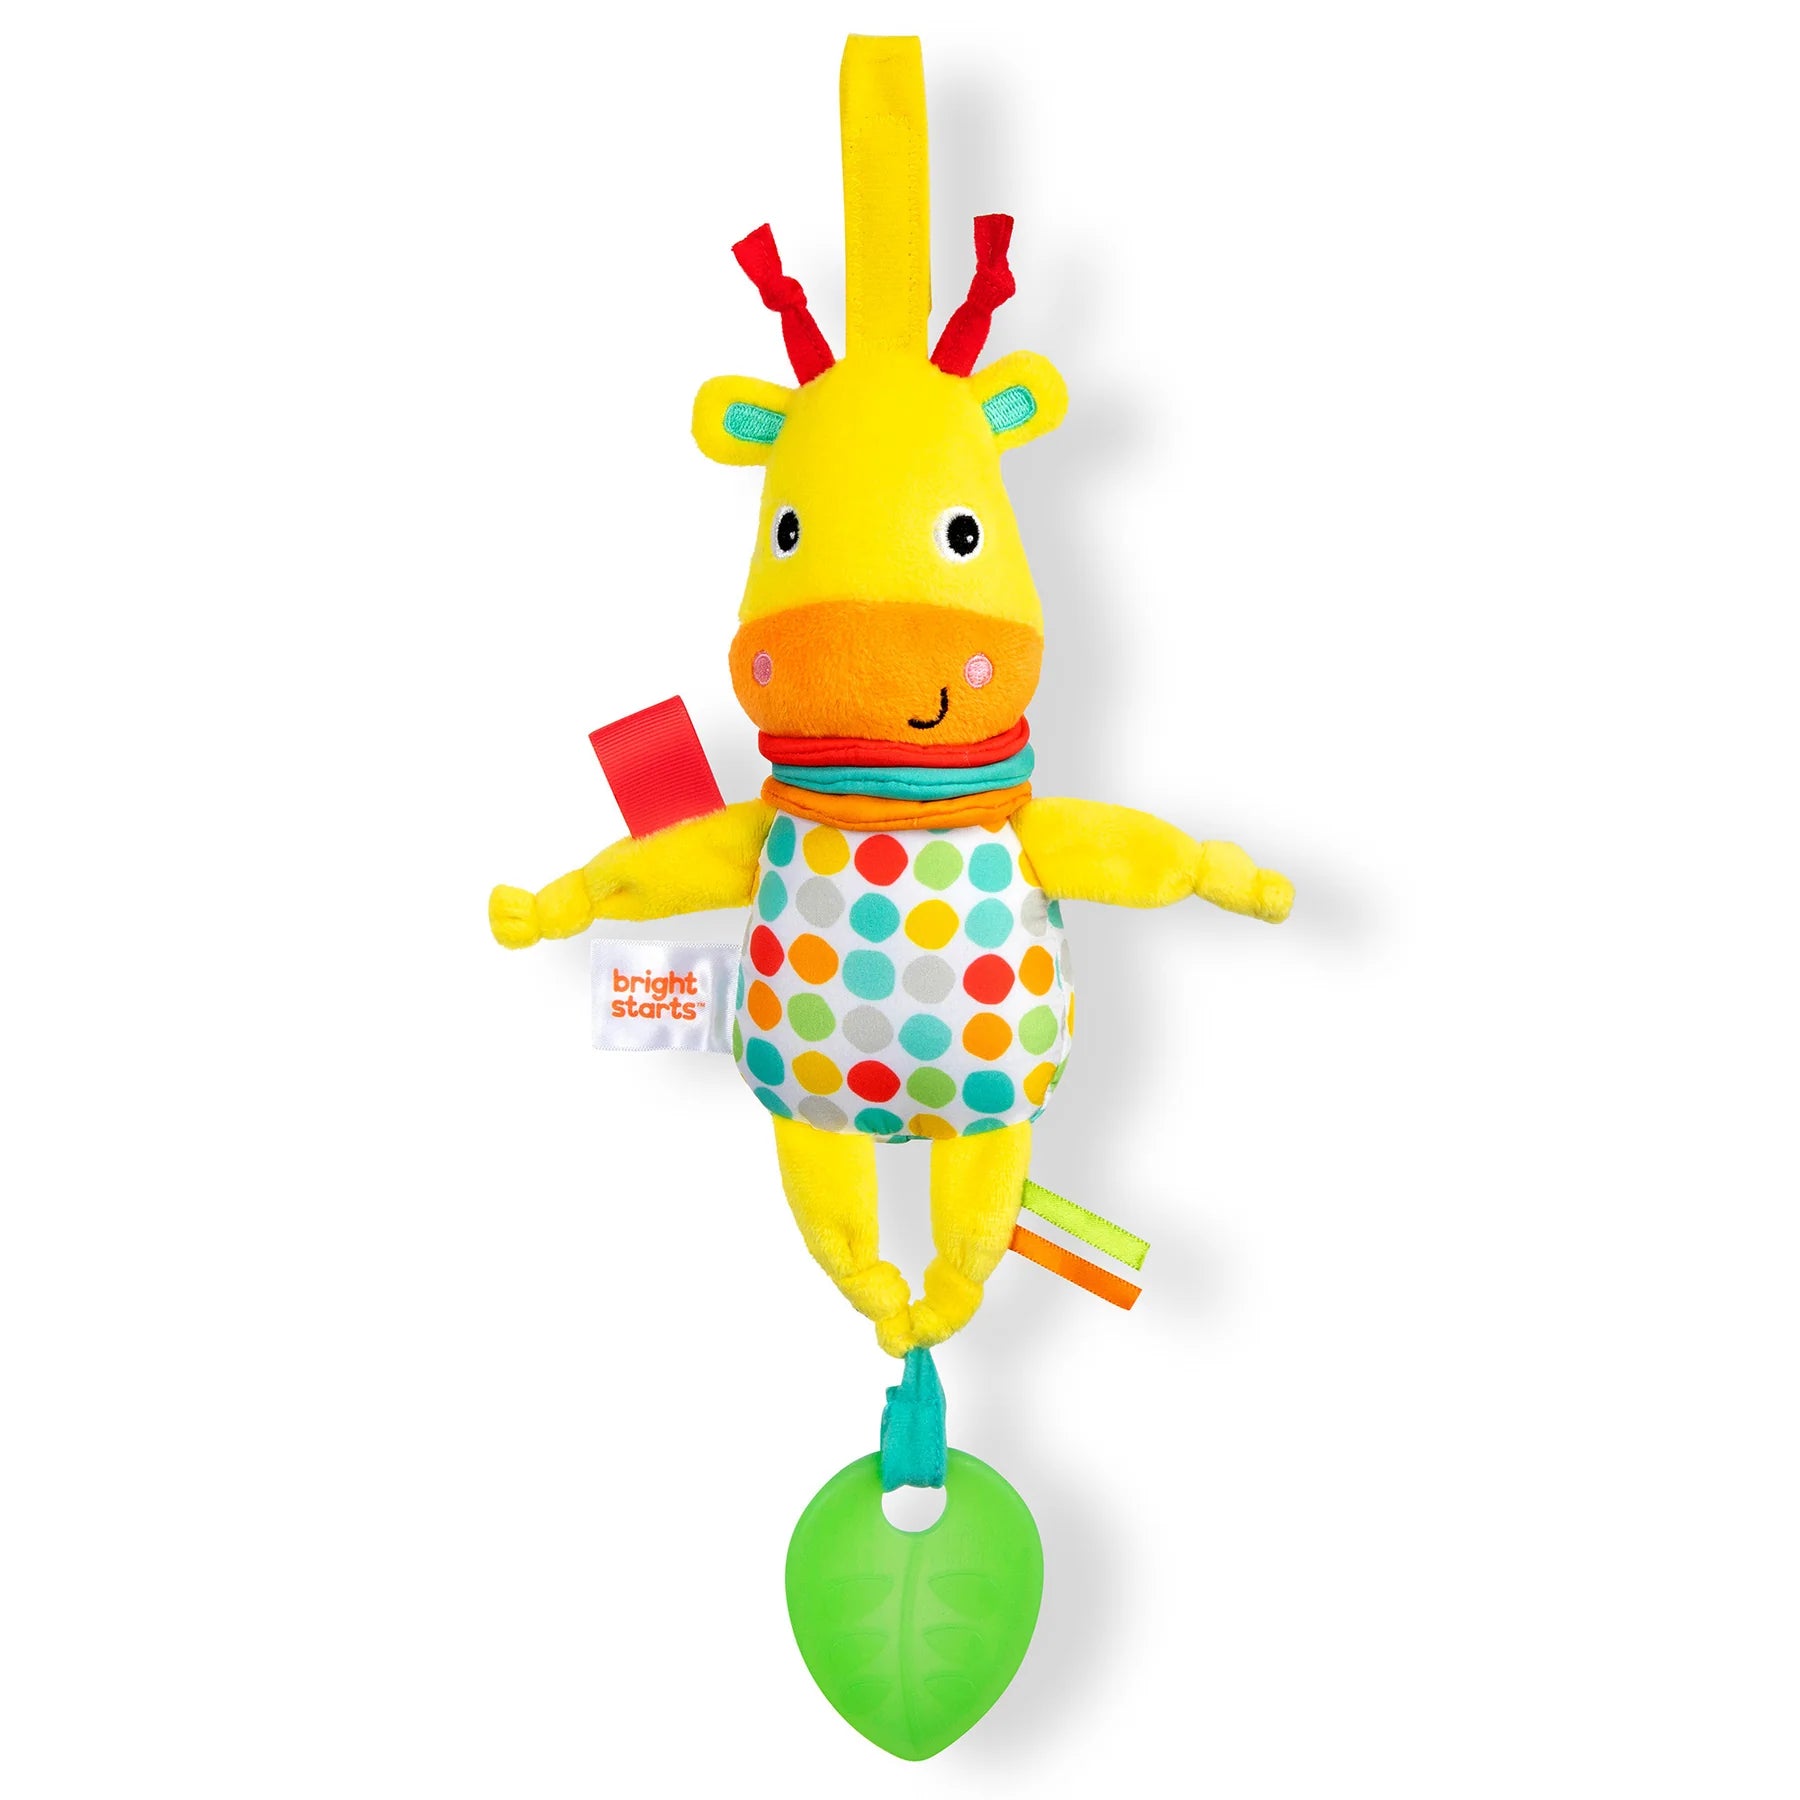 Bright Starts: Pull Play Boogie Musical Activity Toy Giraffe - Ages 0+